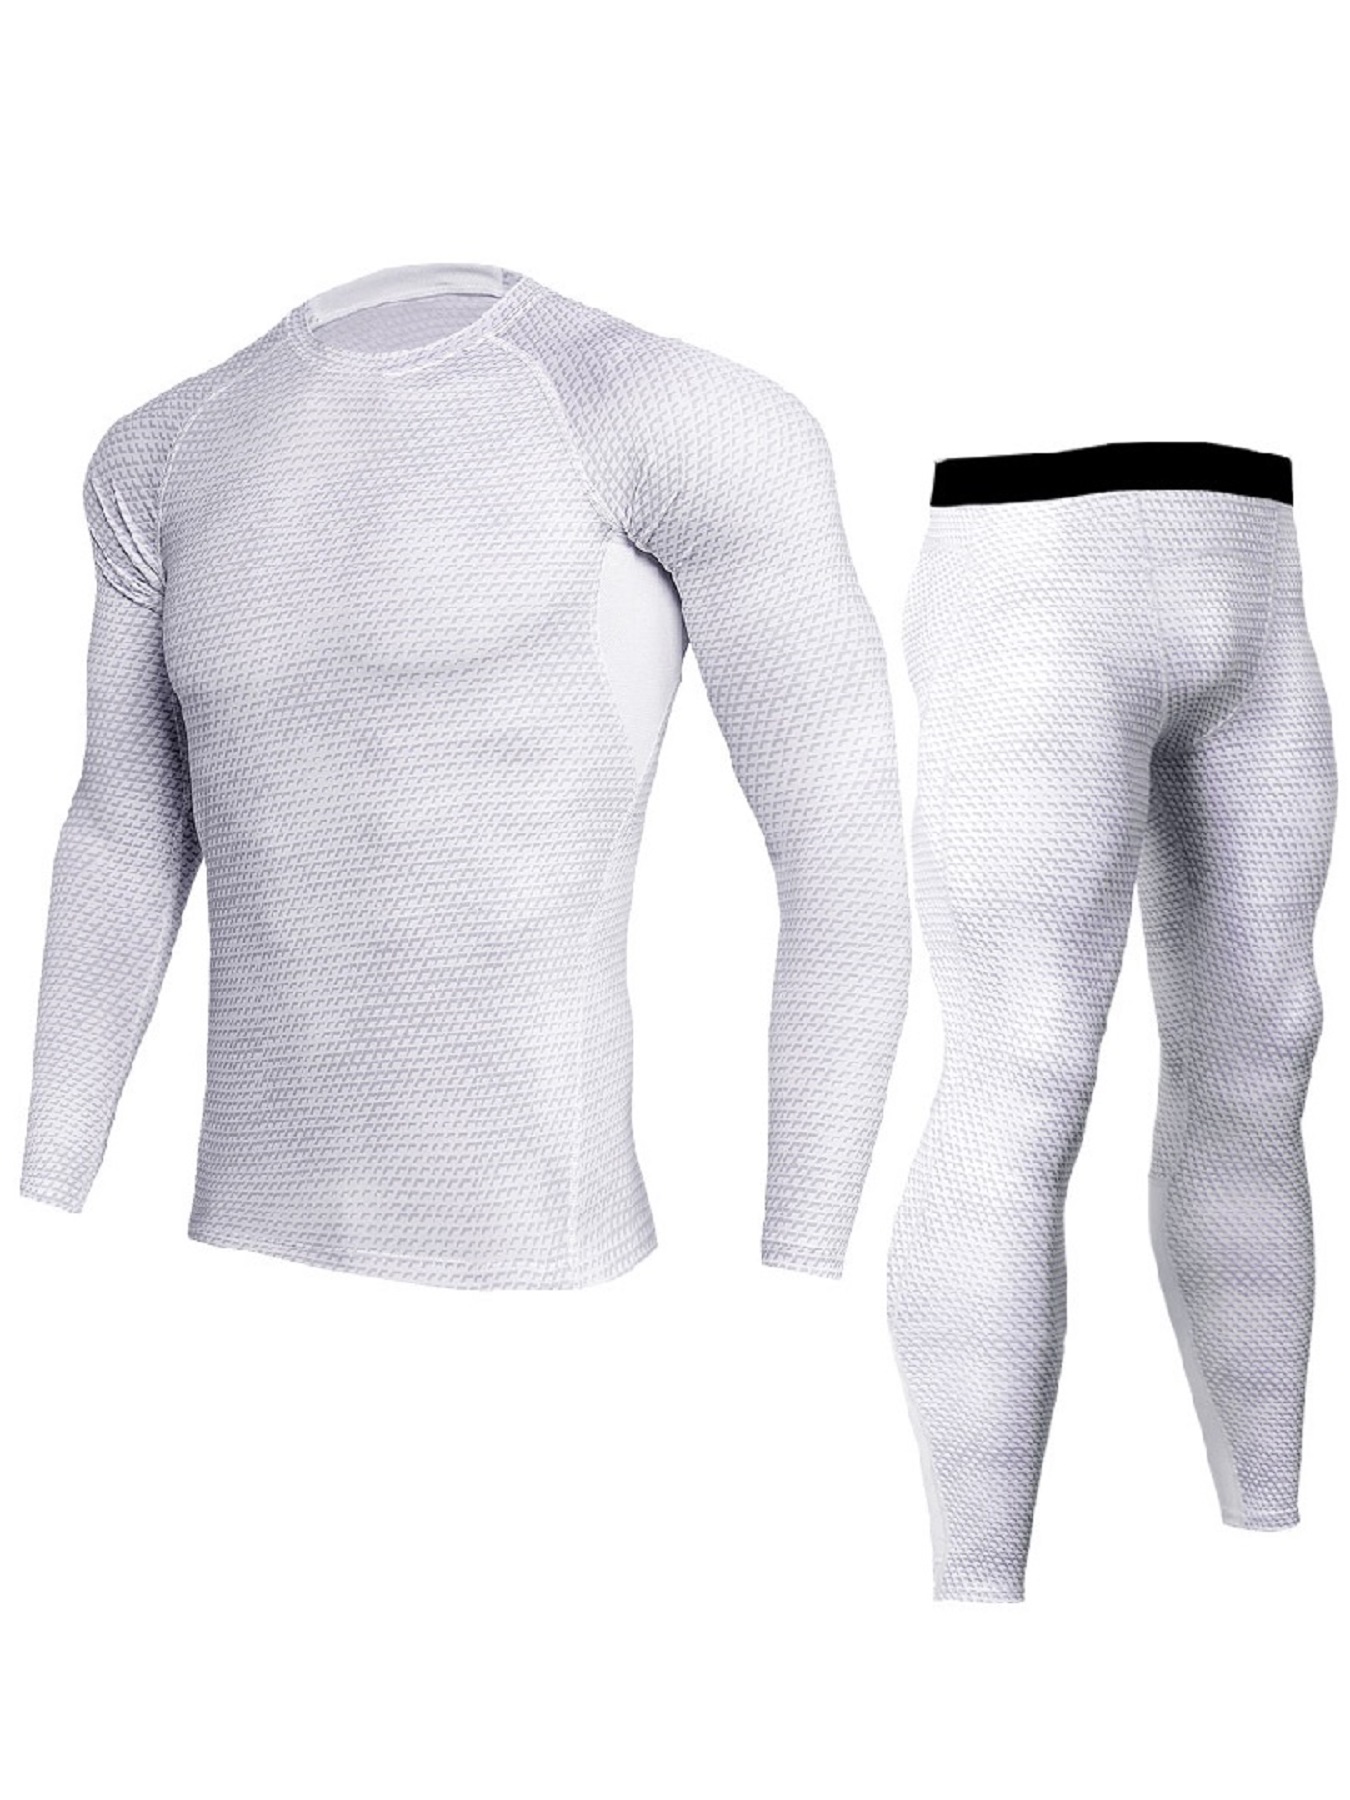 Men's Fitness Compression Suit, Long Sleeve Skinny Fit T-shirt And Leggings  With Letter Pattern For Winter For Running Gym Athletics